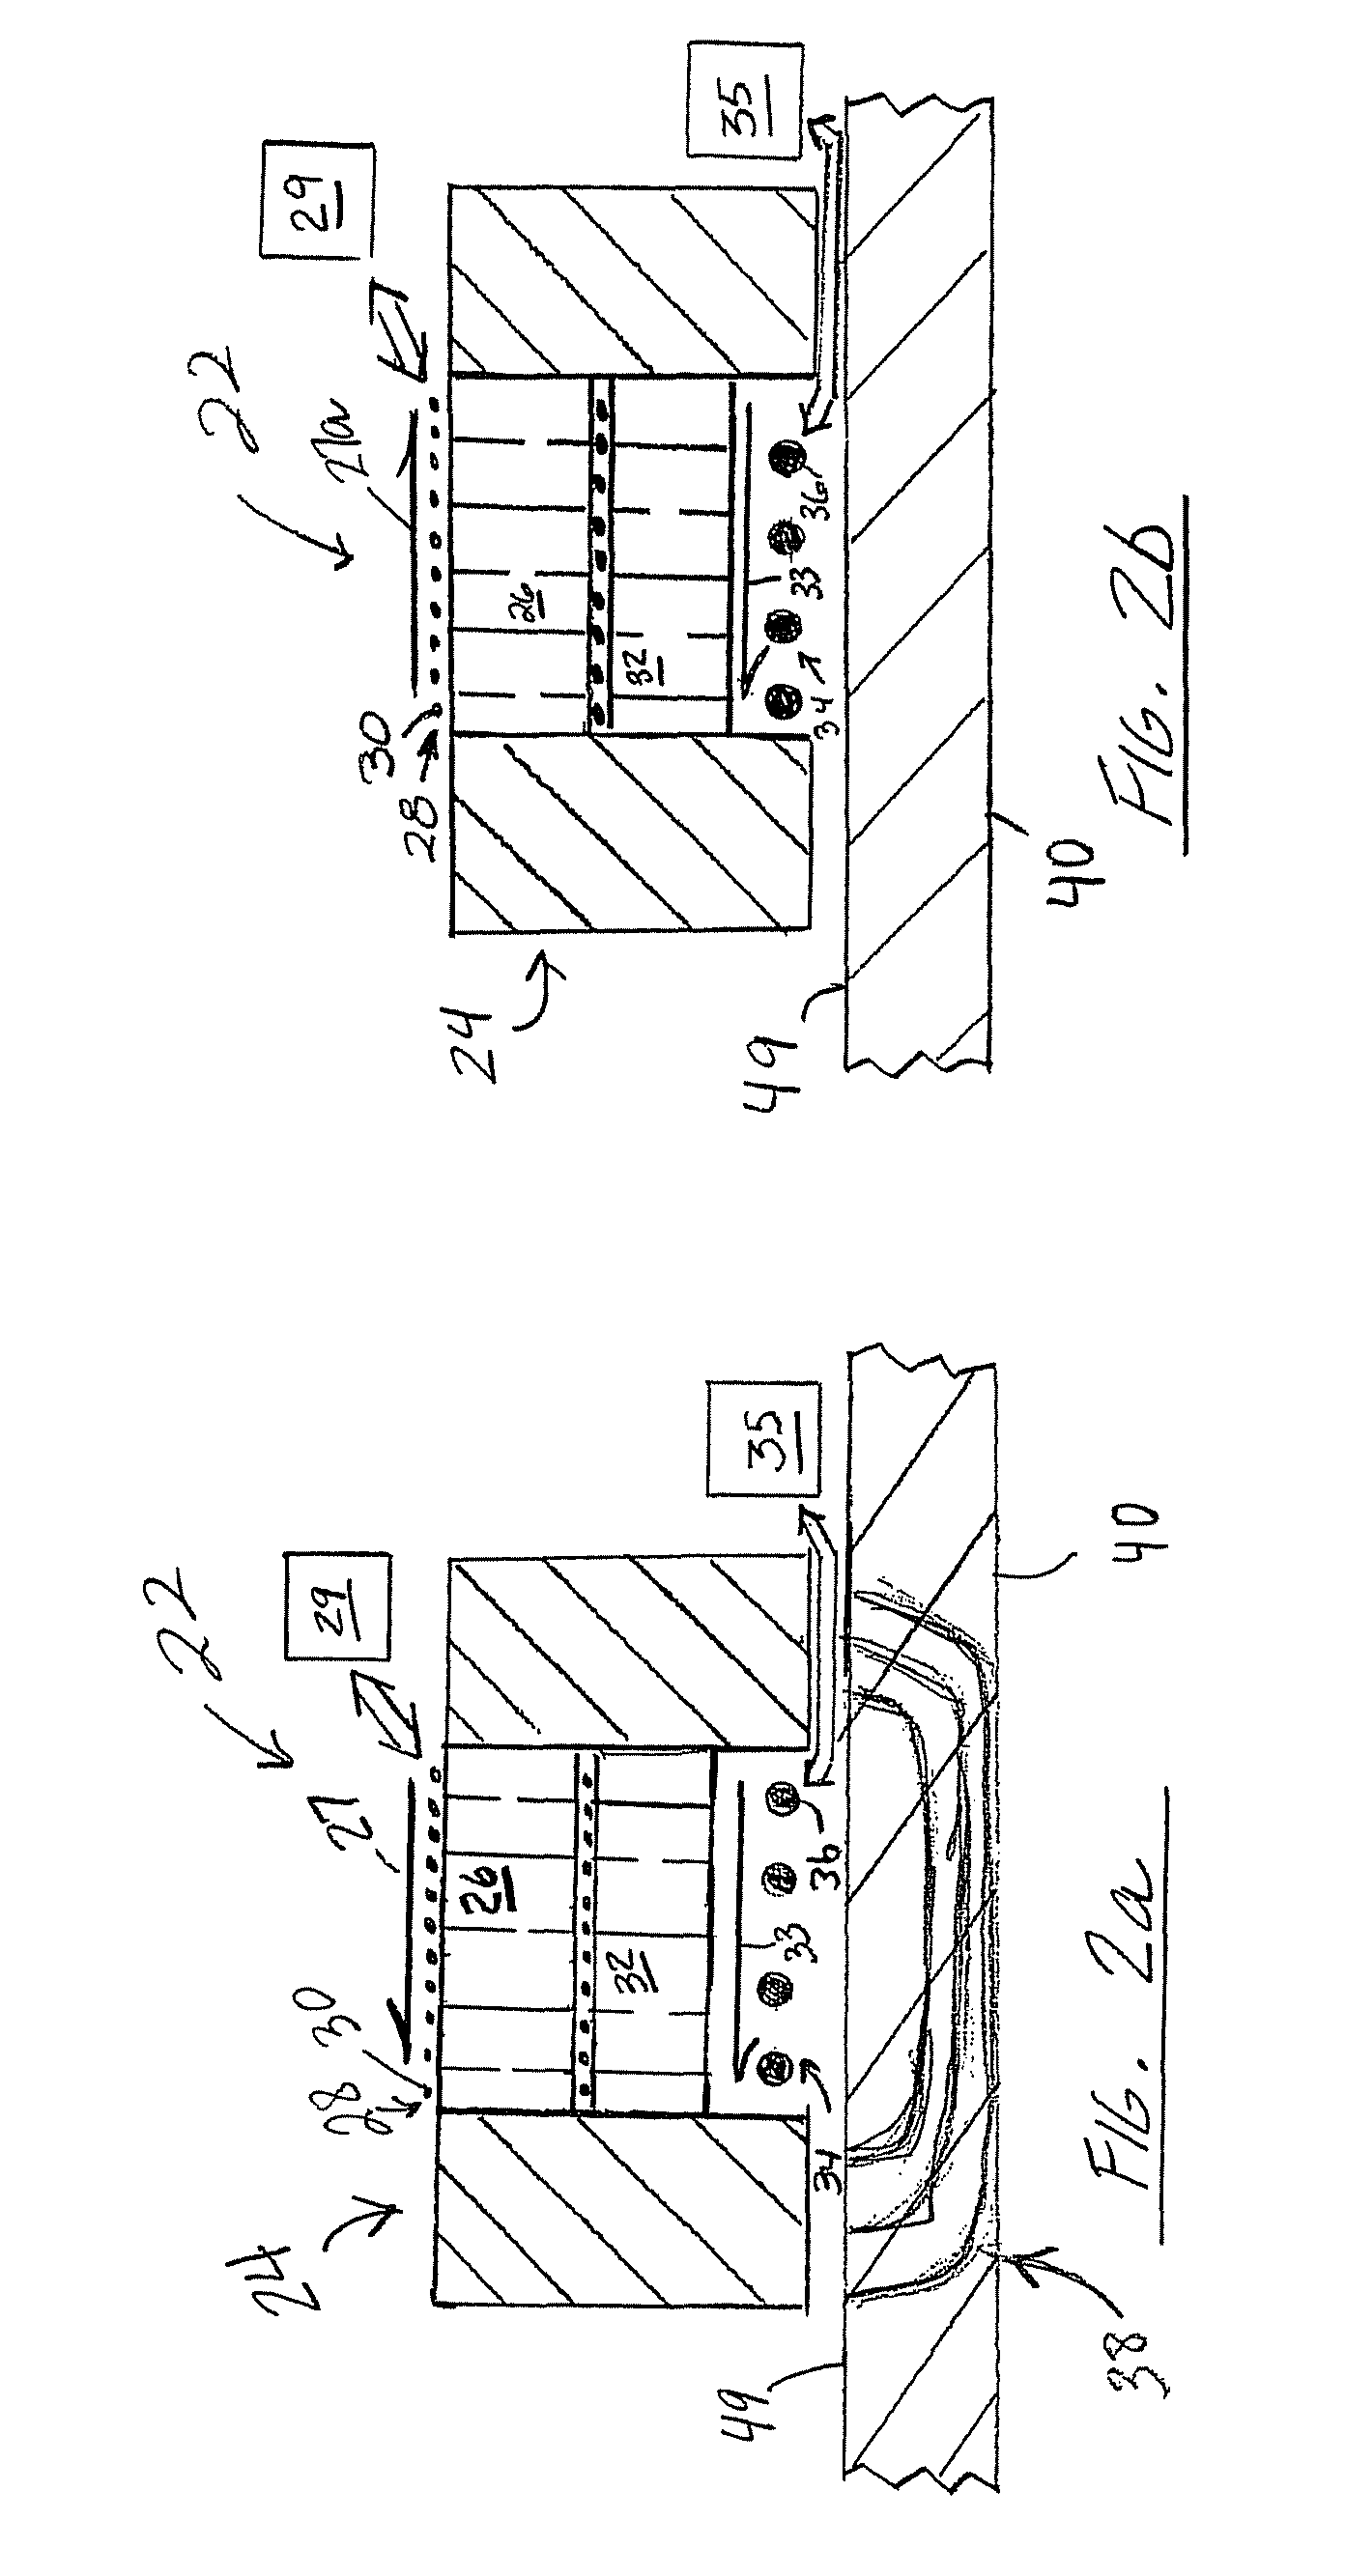 Electromagnetic acoustic transducer with cross-talk elimination